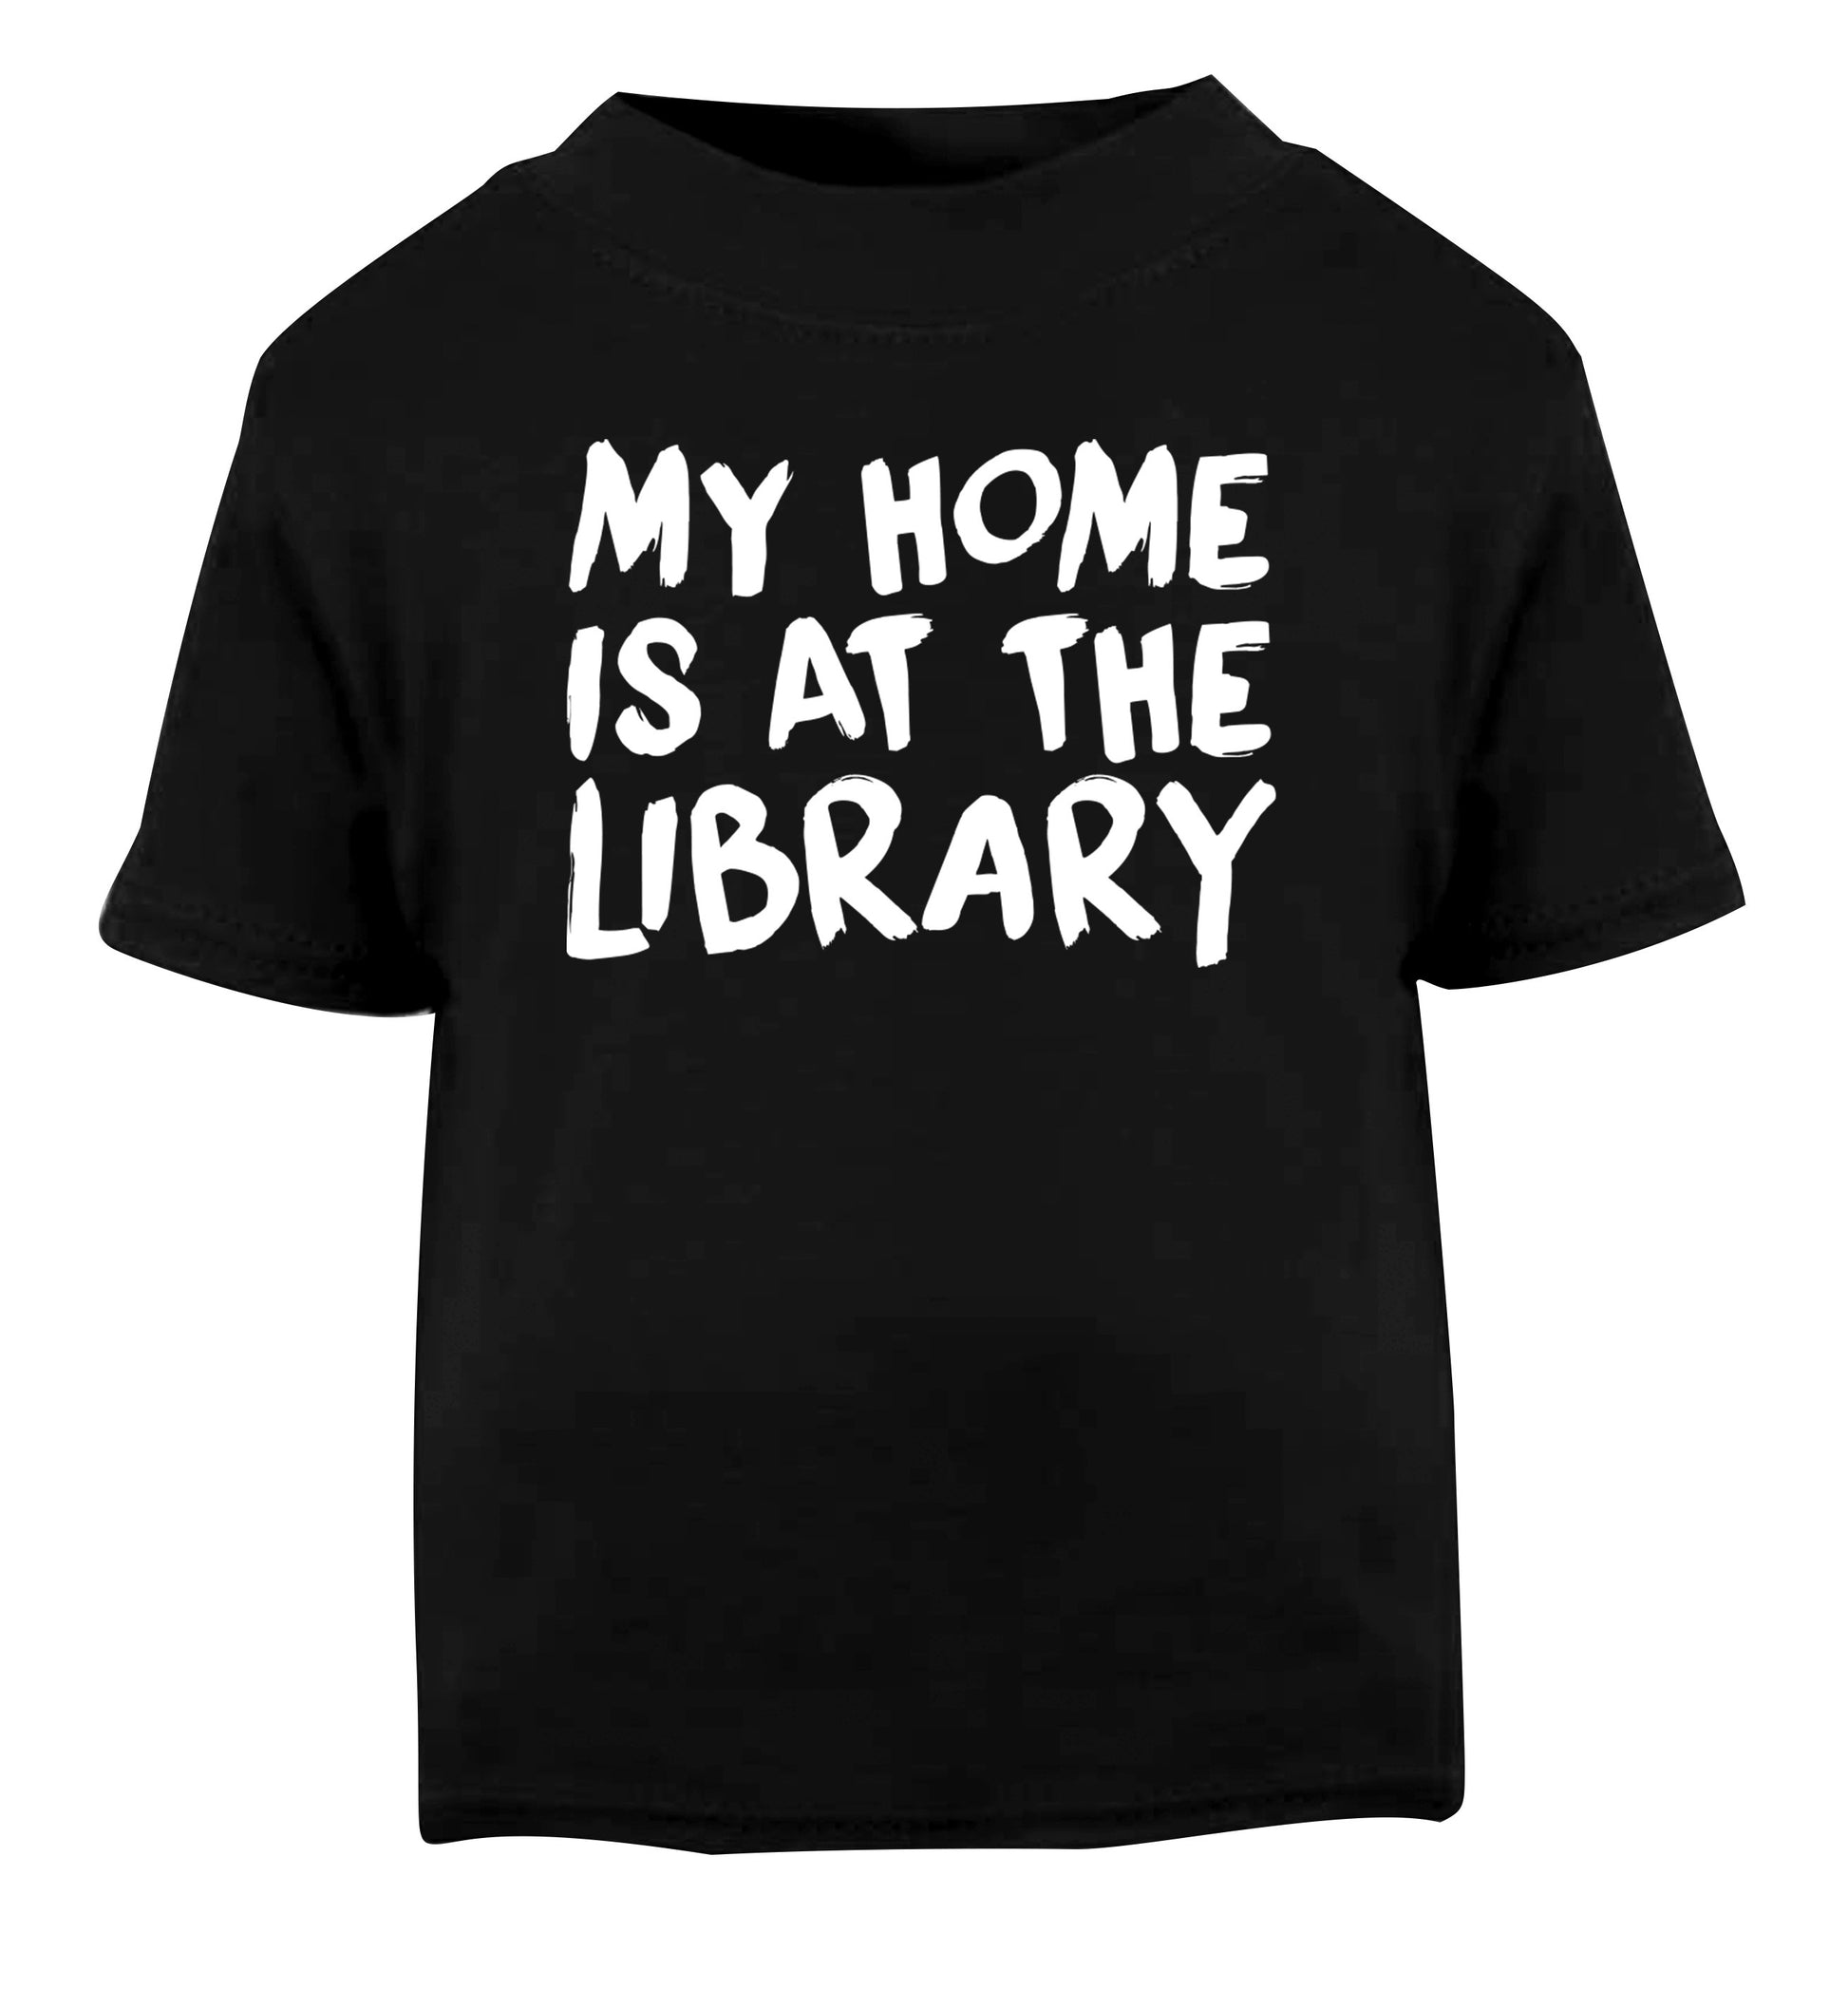 My home is at the library Black Baby Toddler Tshirt 2 years